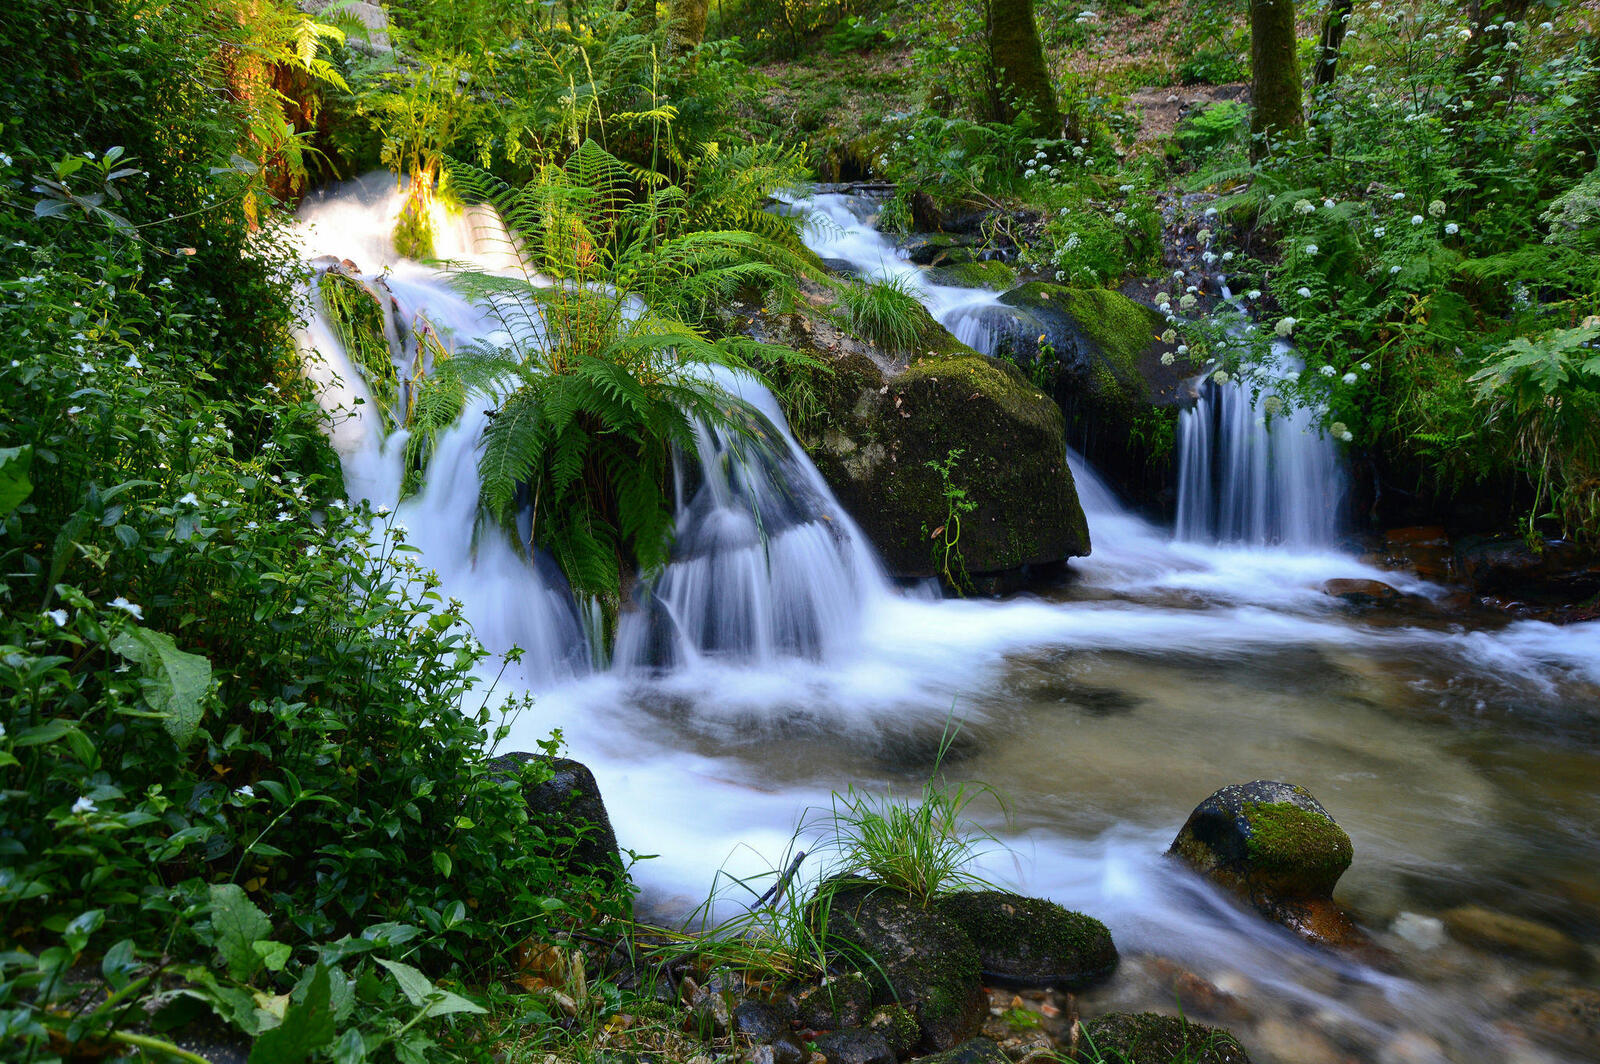 Wallpapers plants nature waterfall on the desktop